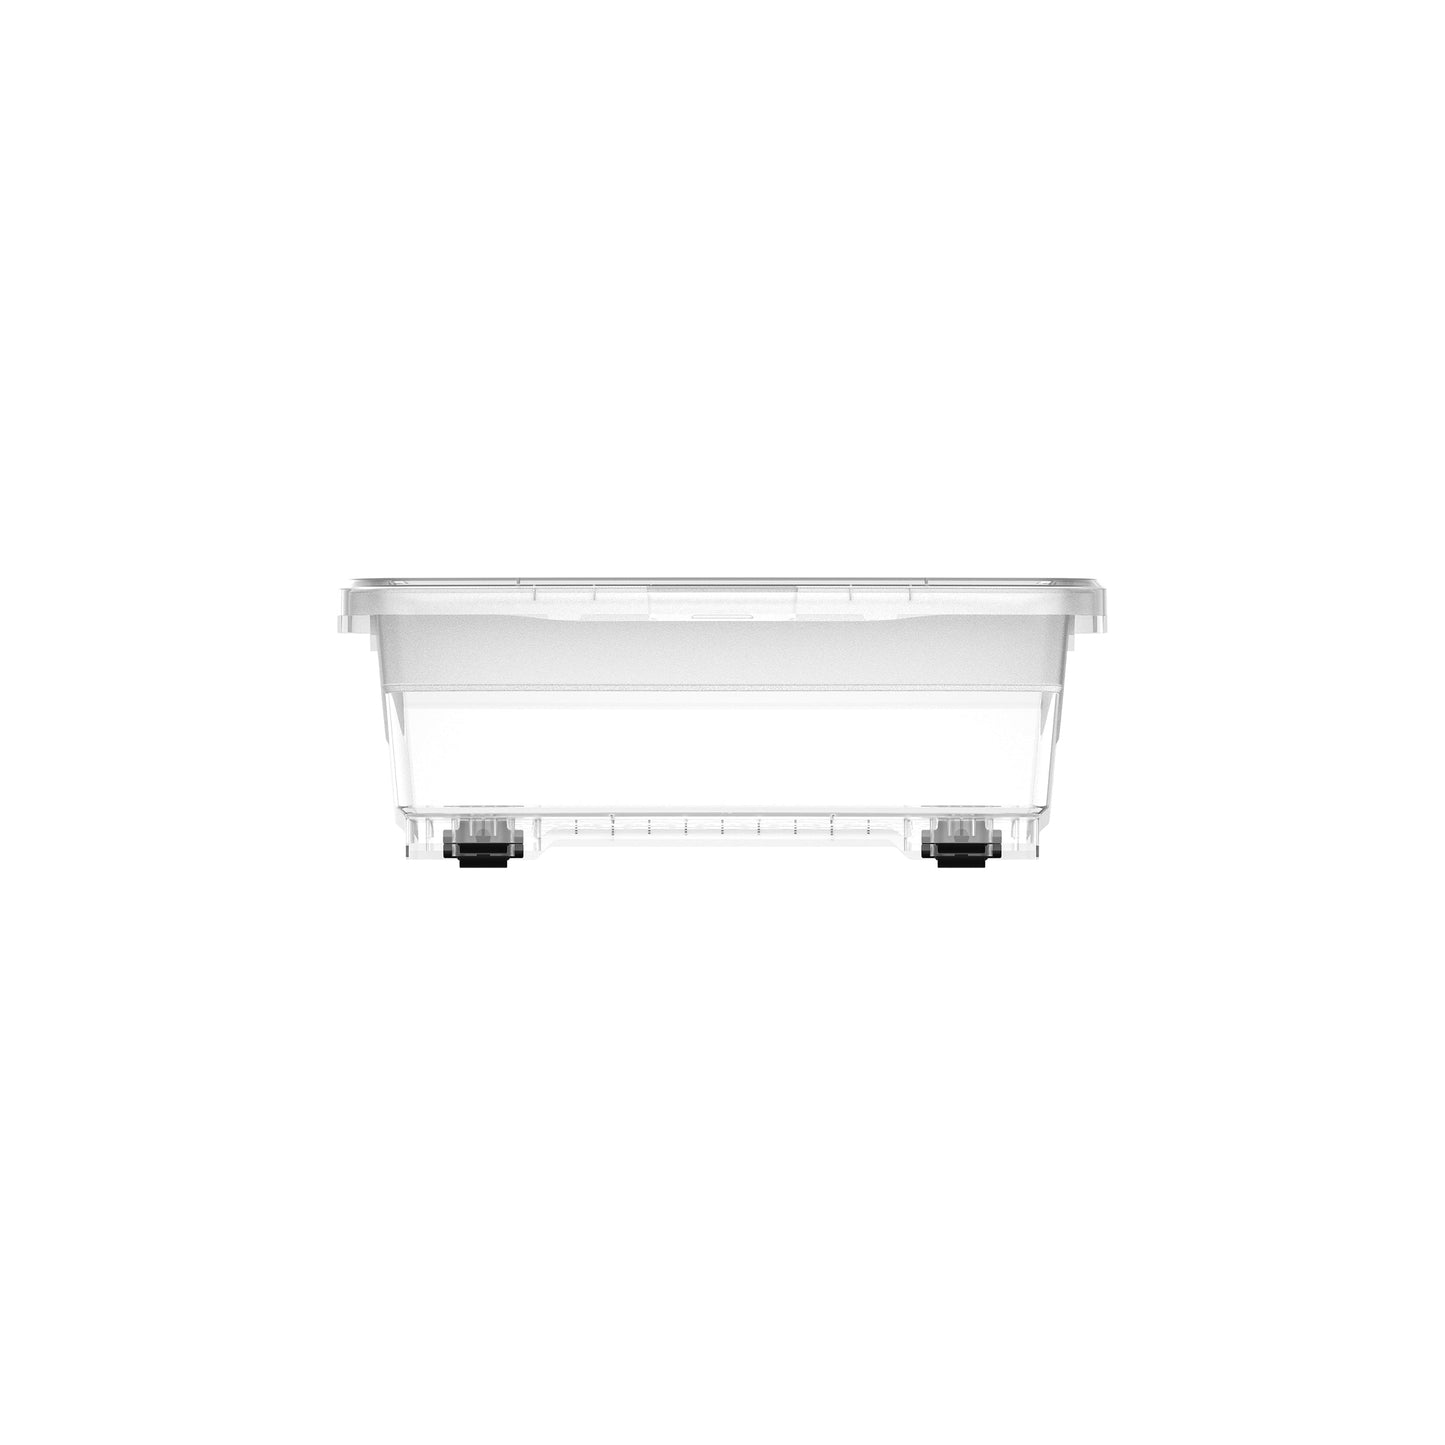  CLEAR PLASTIC UNDERBED STORAGE BOX WITH WHEELS